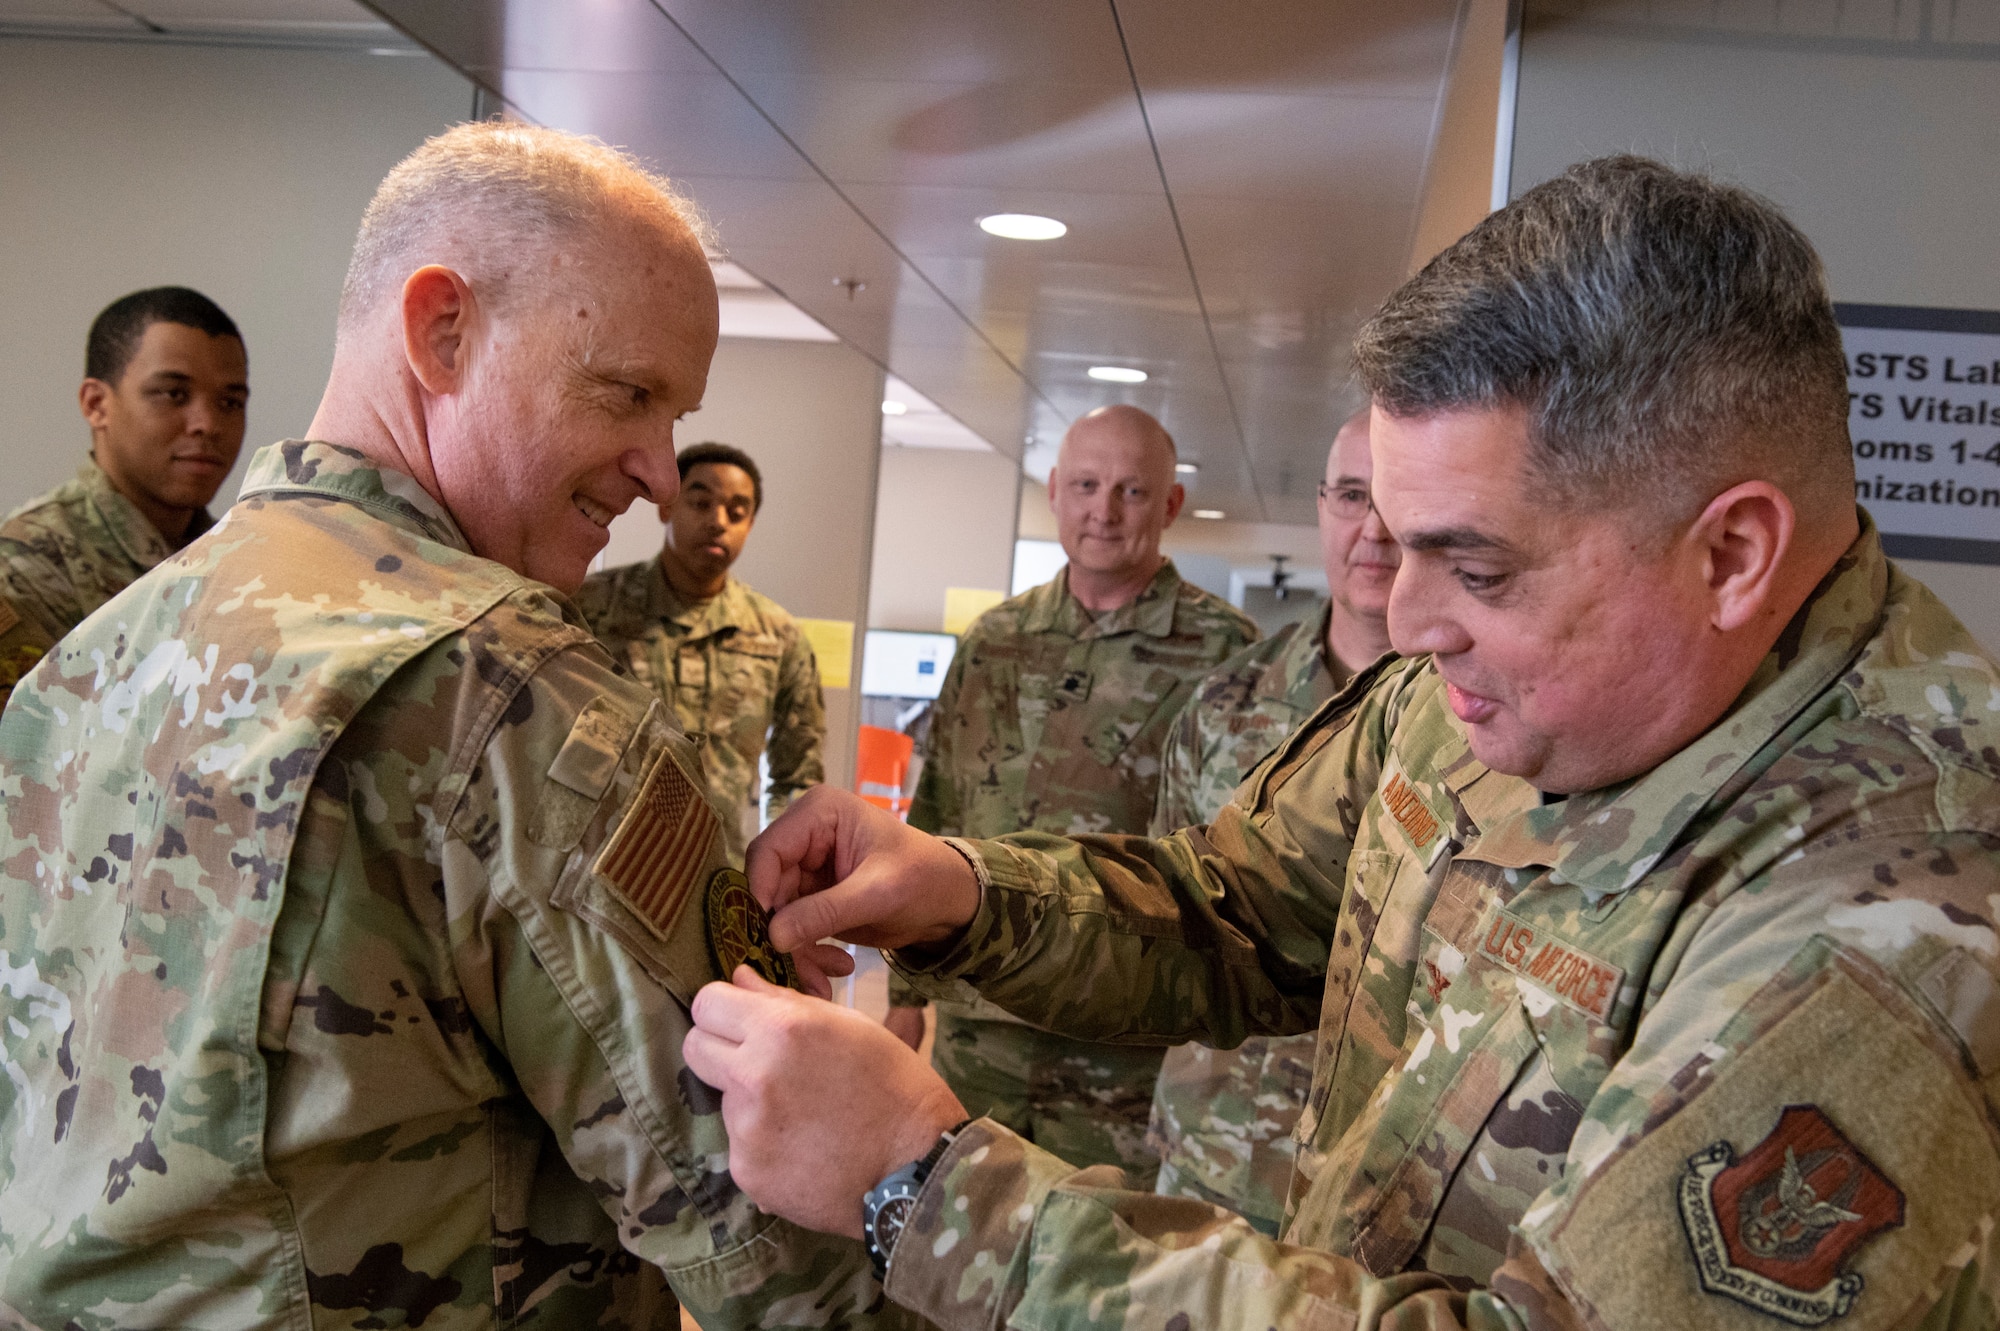 Two men in OCP uniforms interact while one places a patch on the sleeve of the other as onlookers observe